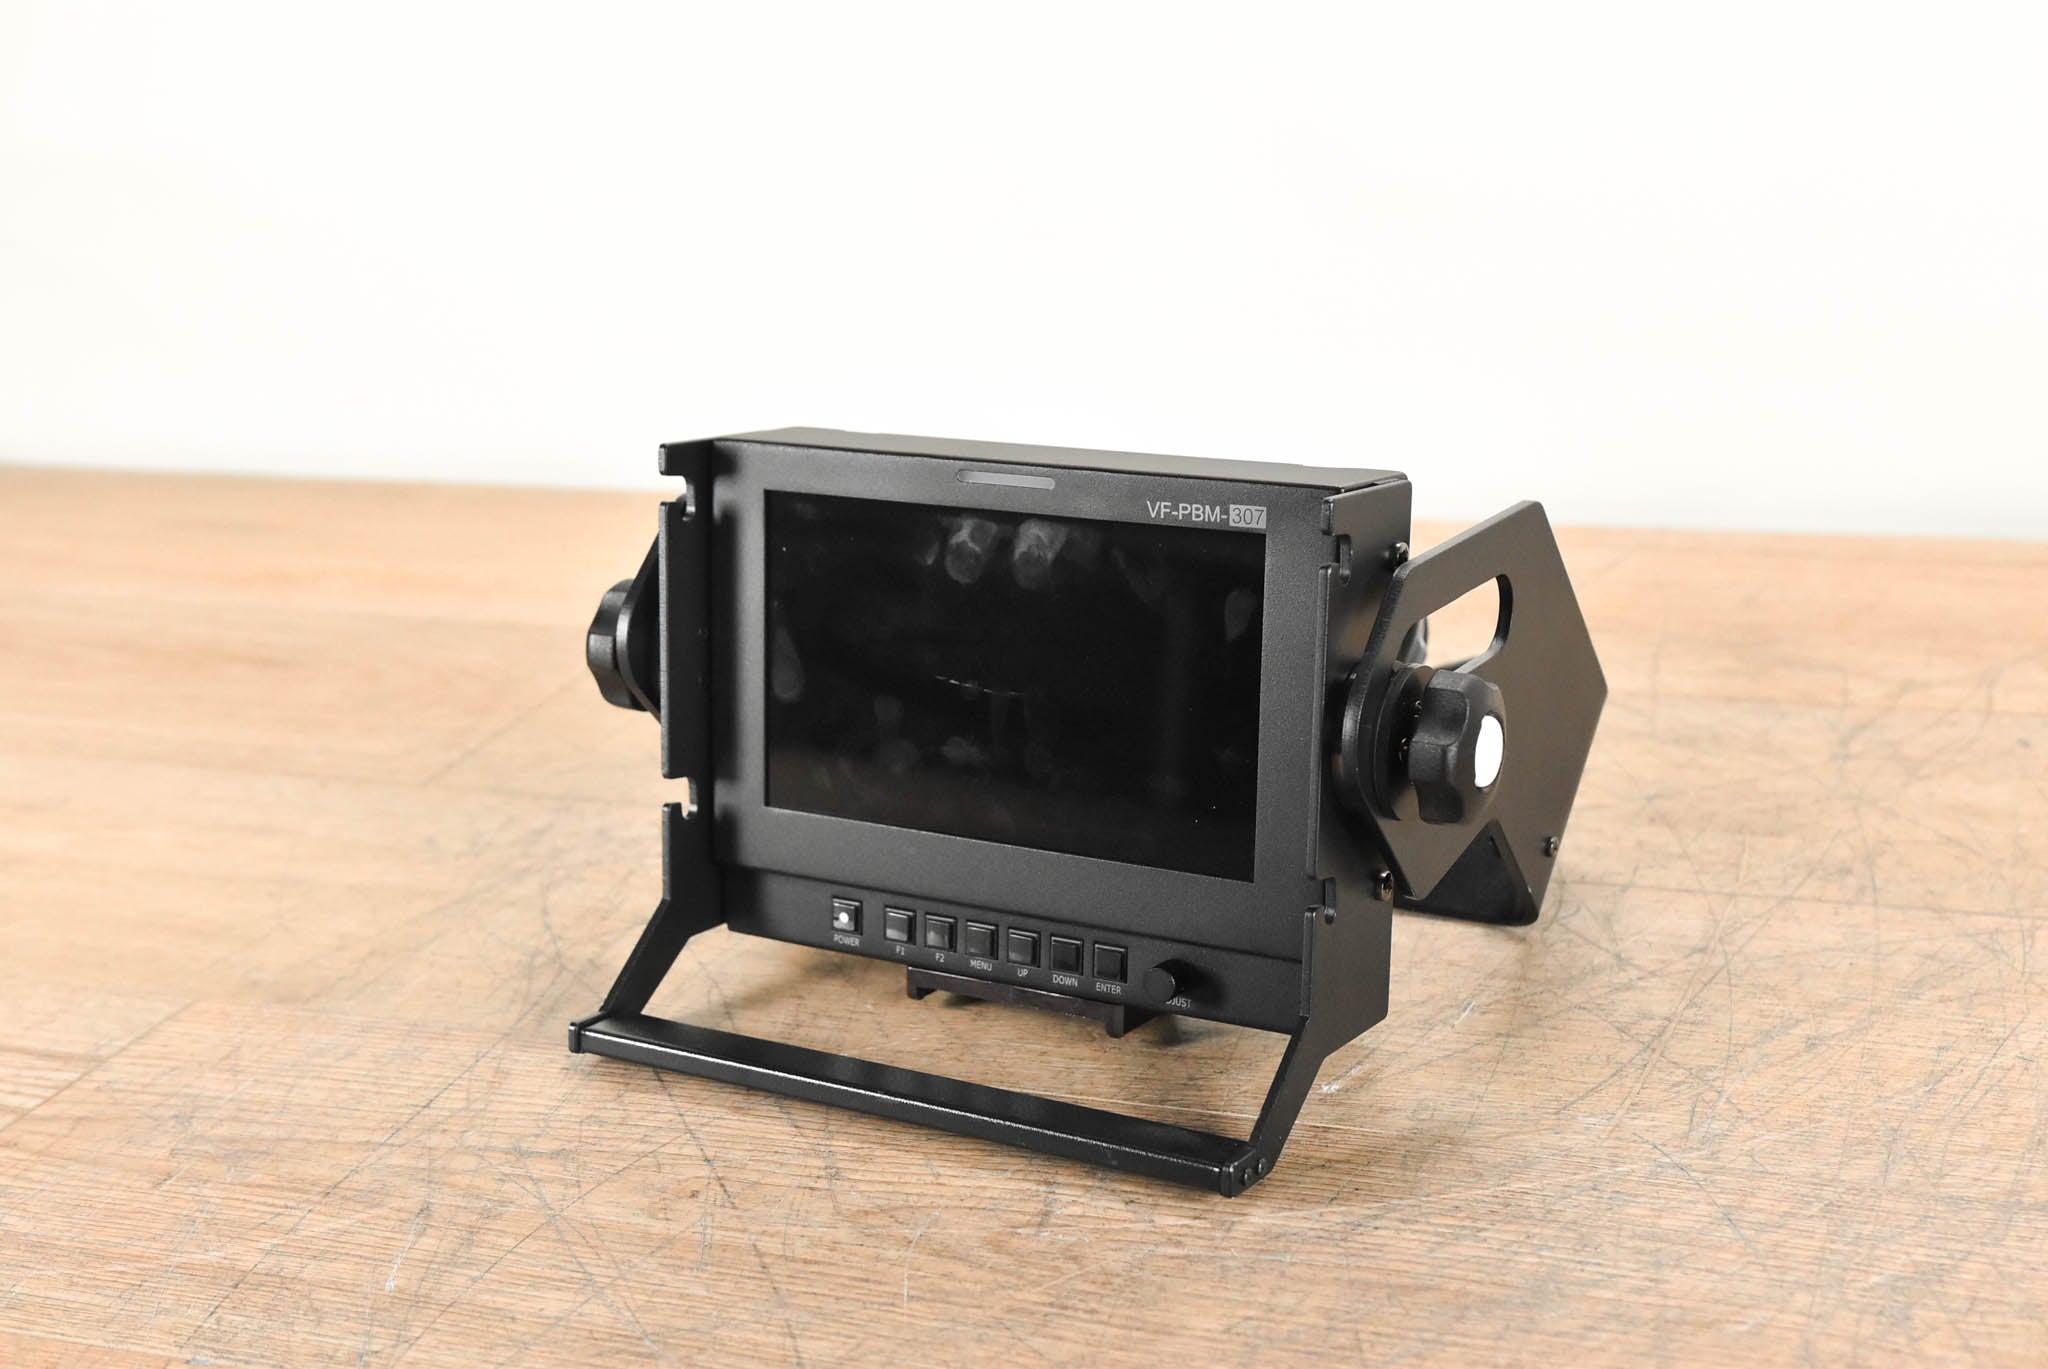 Hitachi VF-PBM-307 7-inch HD Color Viewfinder with AT-750 Mount